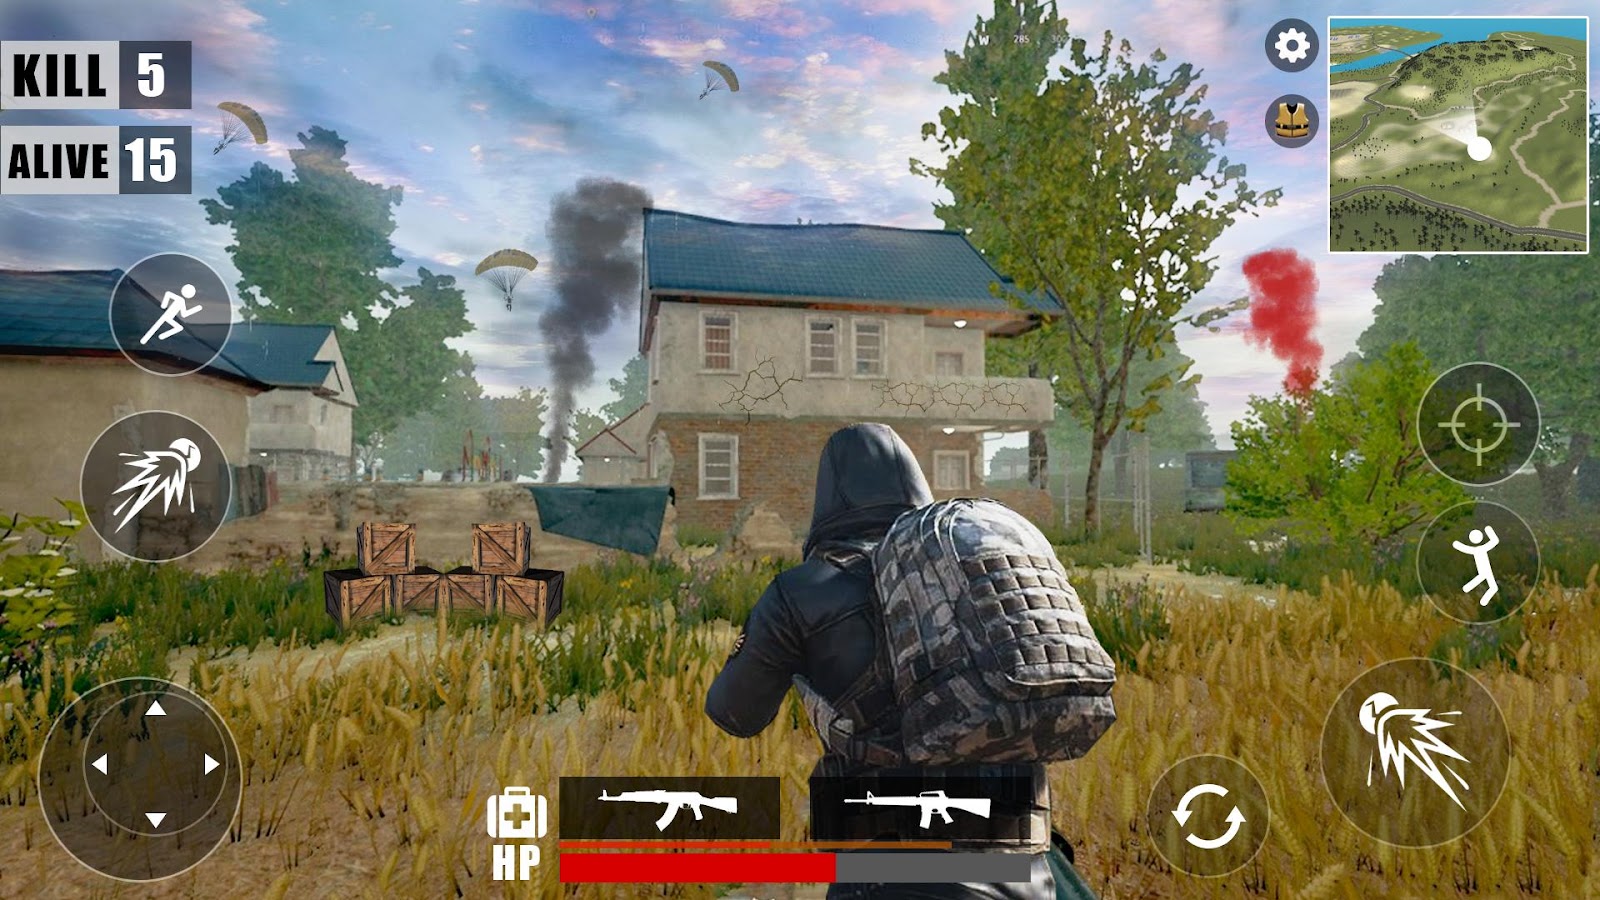 Miss playing PUBG? Check out five games like PUBG Mobile under 200 MB